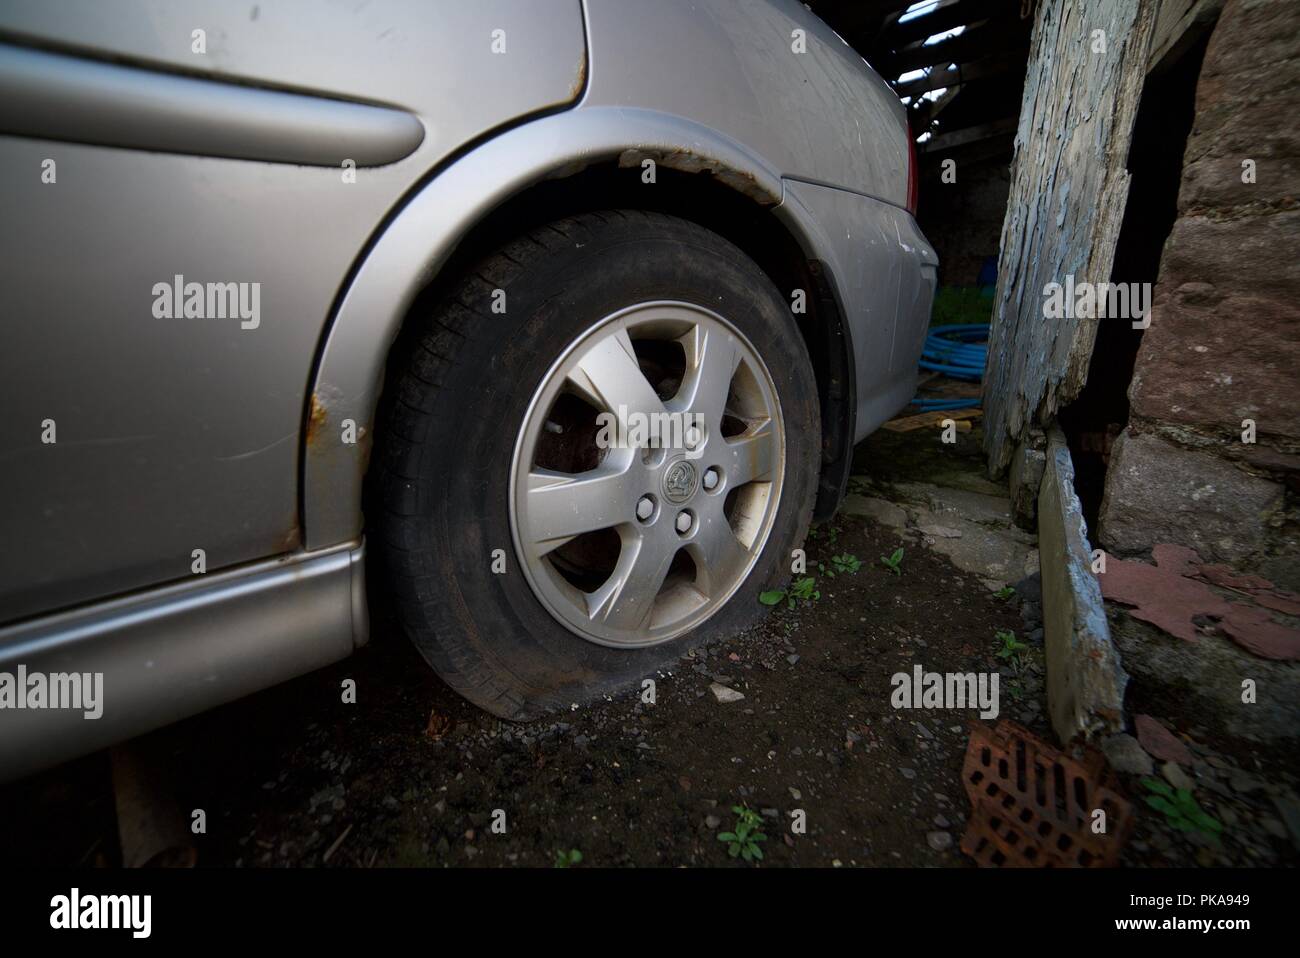 Popped tyre on a car (grey vauxhall with deflated back tyre from puncture) Stock Photo